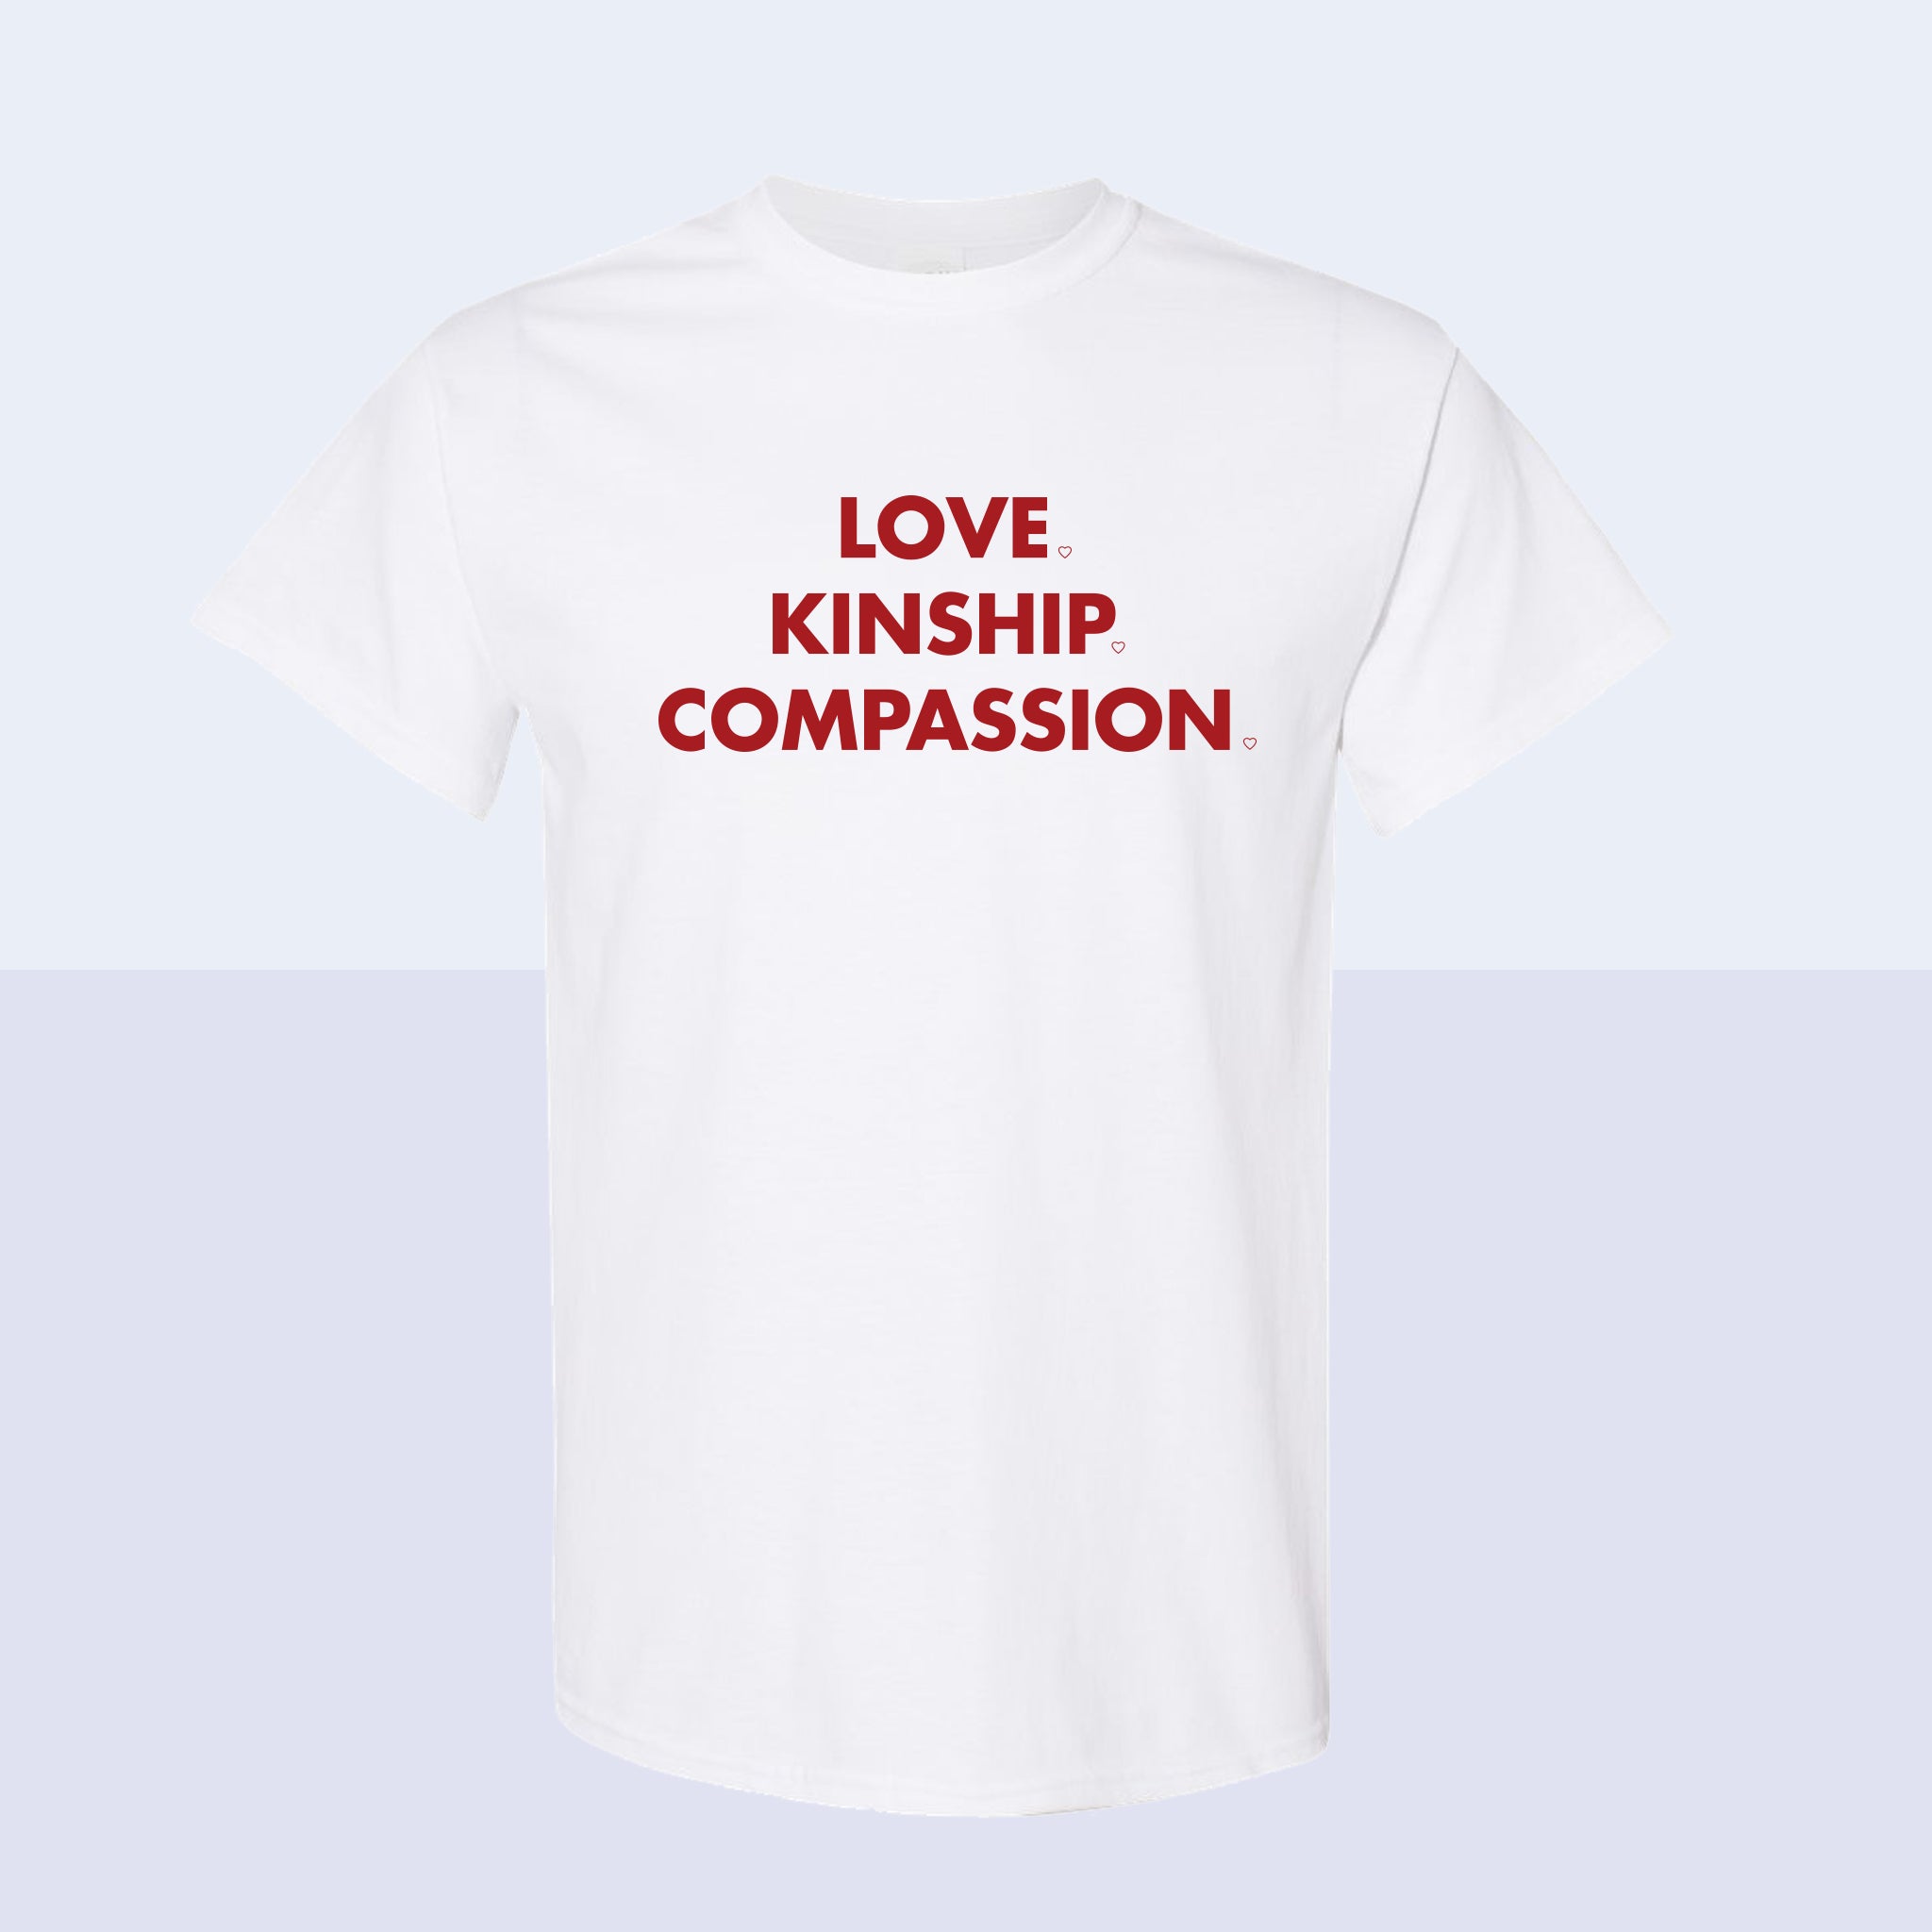 Love Limited Edition T-Shirt